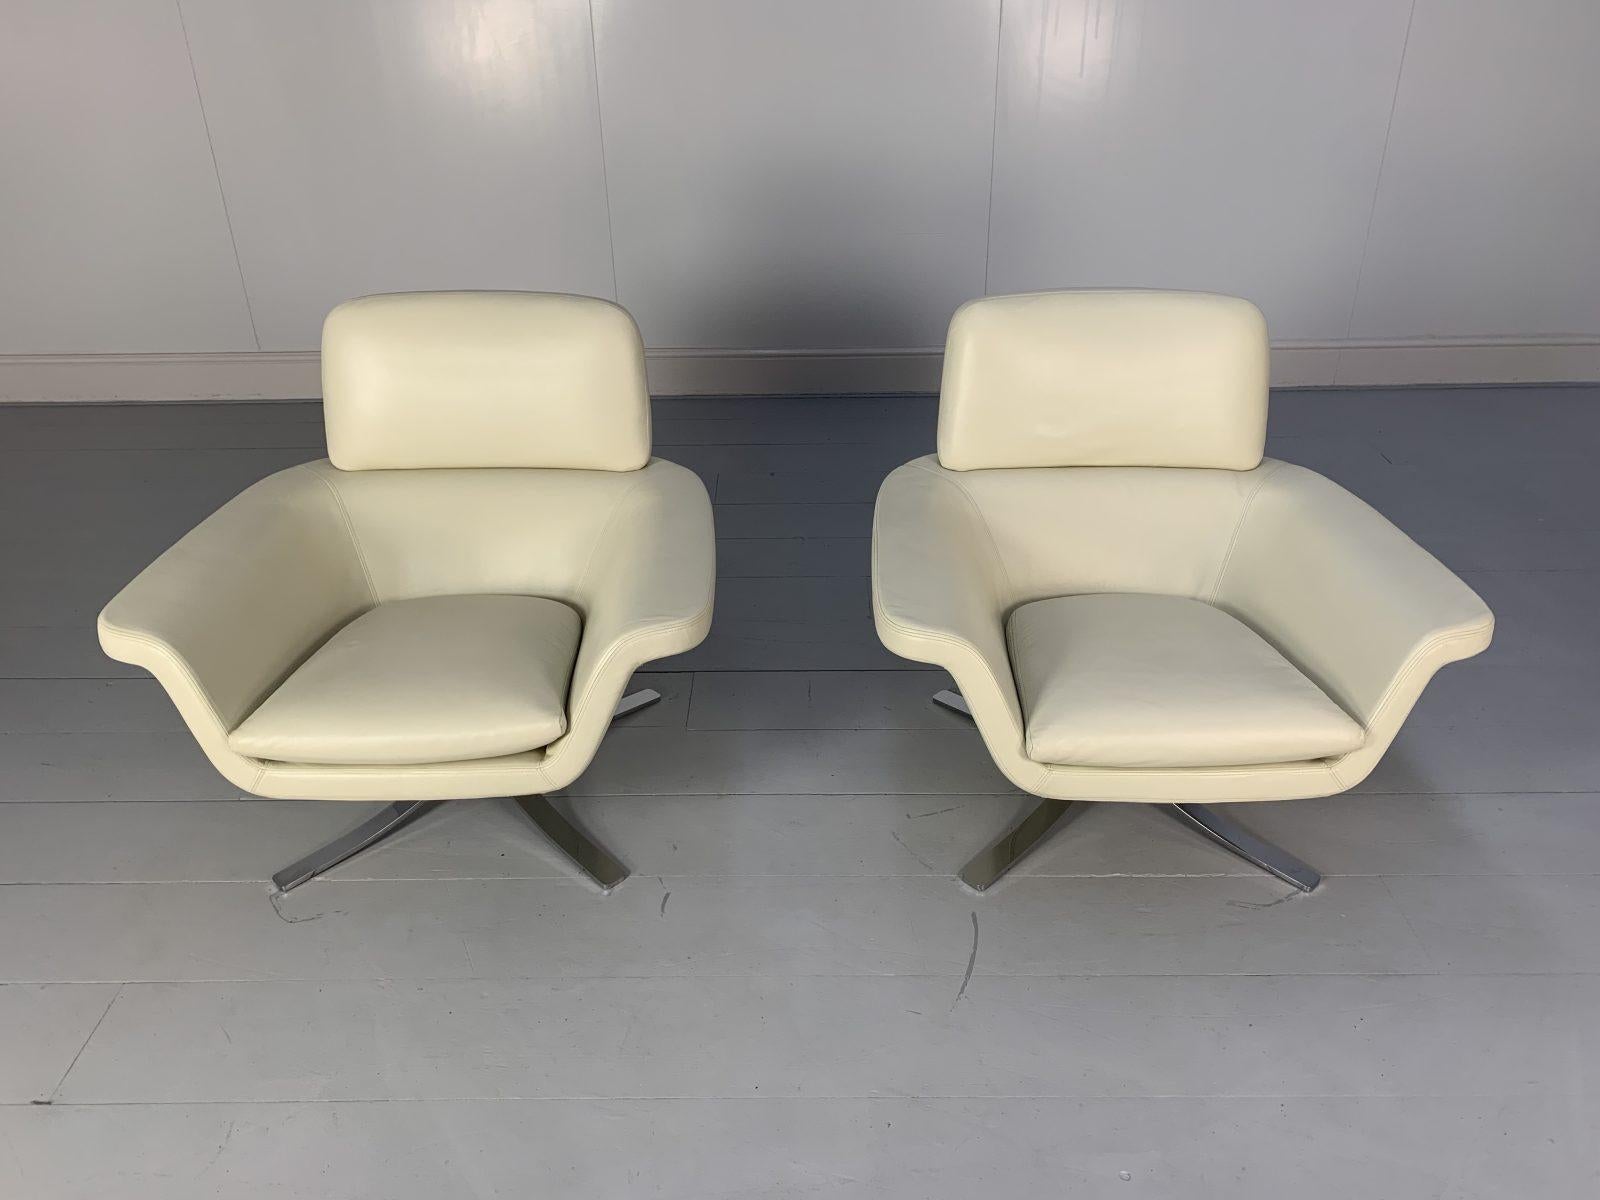 Contemporary Minotti “Blake Soft” Armchairs, in Ivory Leather